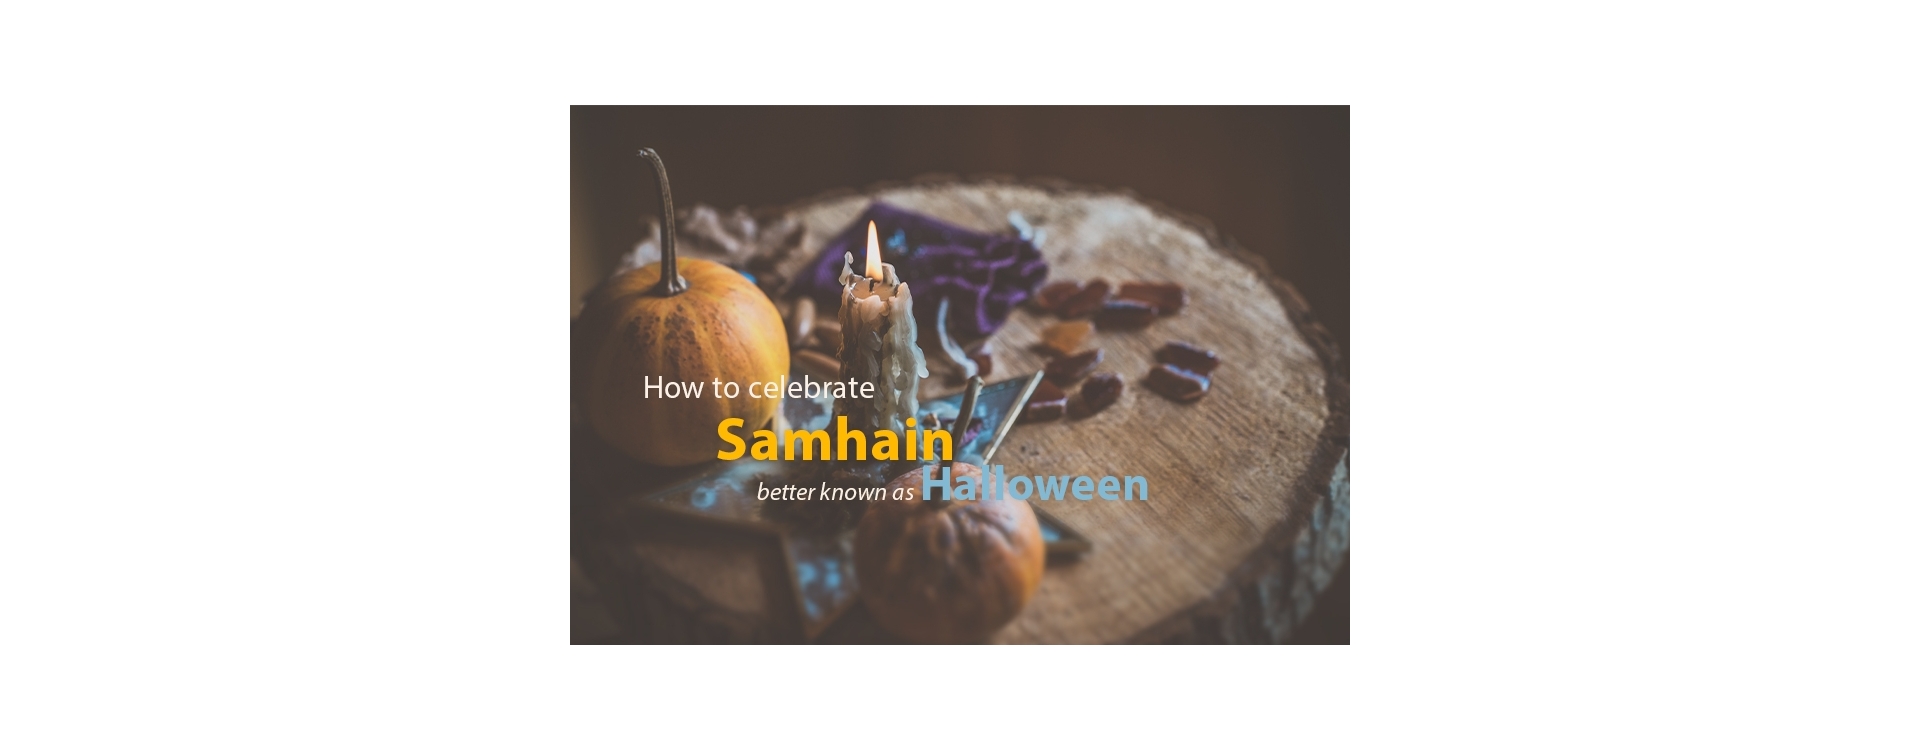 6 Ways to Celebrate Samhain/Halloween in a Meaningful Way